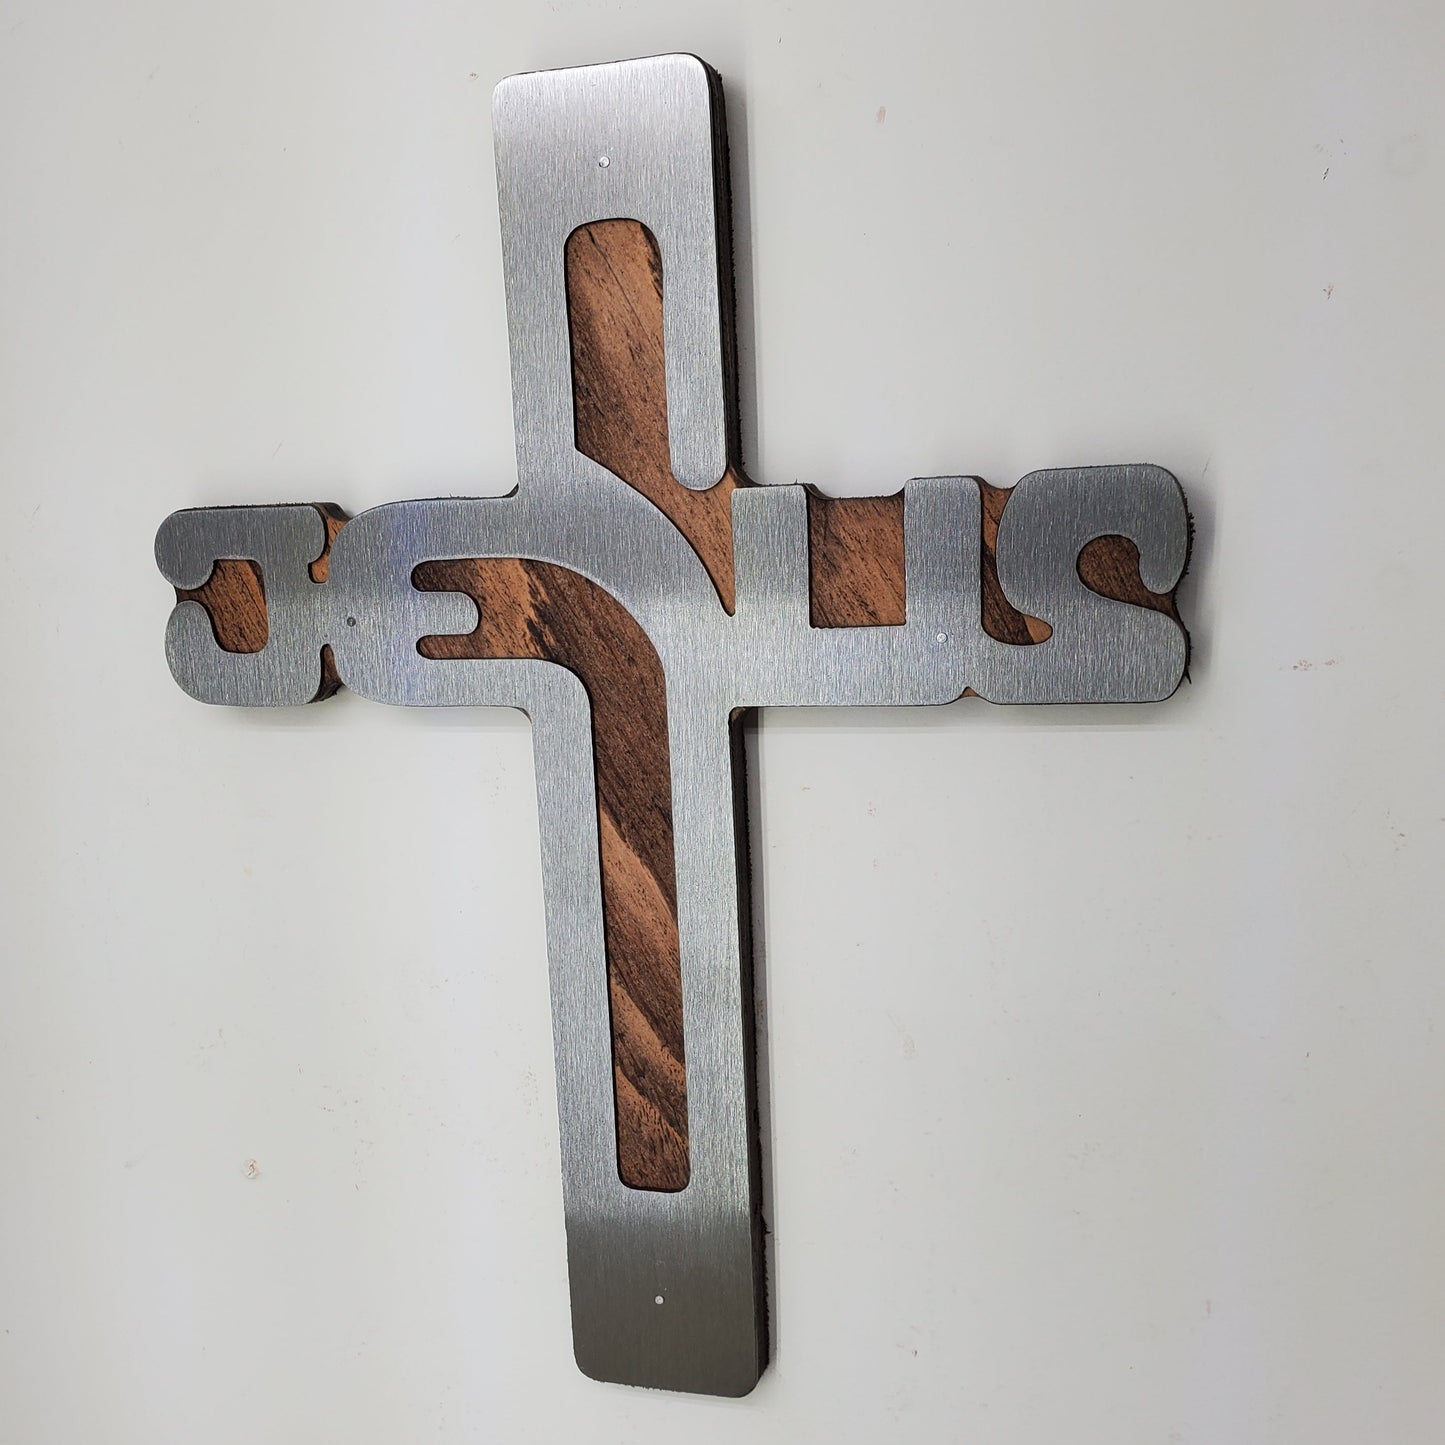 A perfect gift to show your love and faith for the Jesus Christ - with our lively and stunningly religious metal wall art on stained wood background.